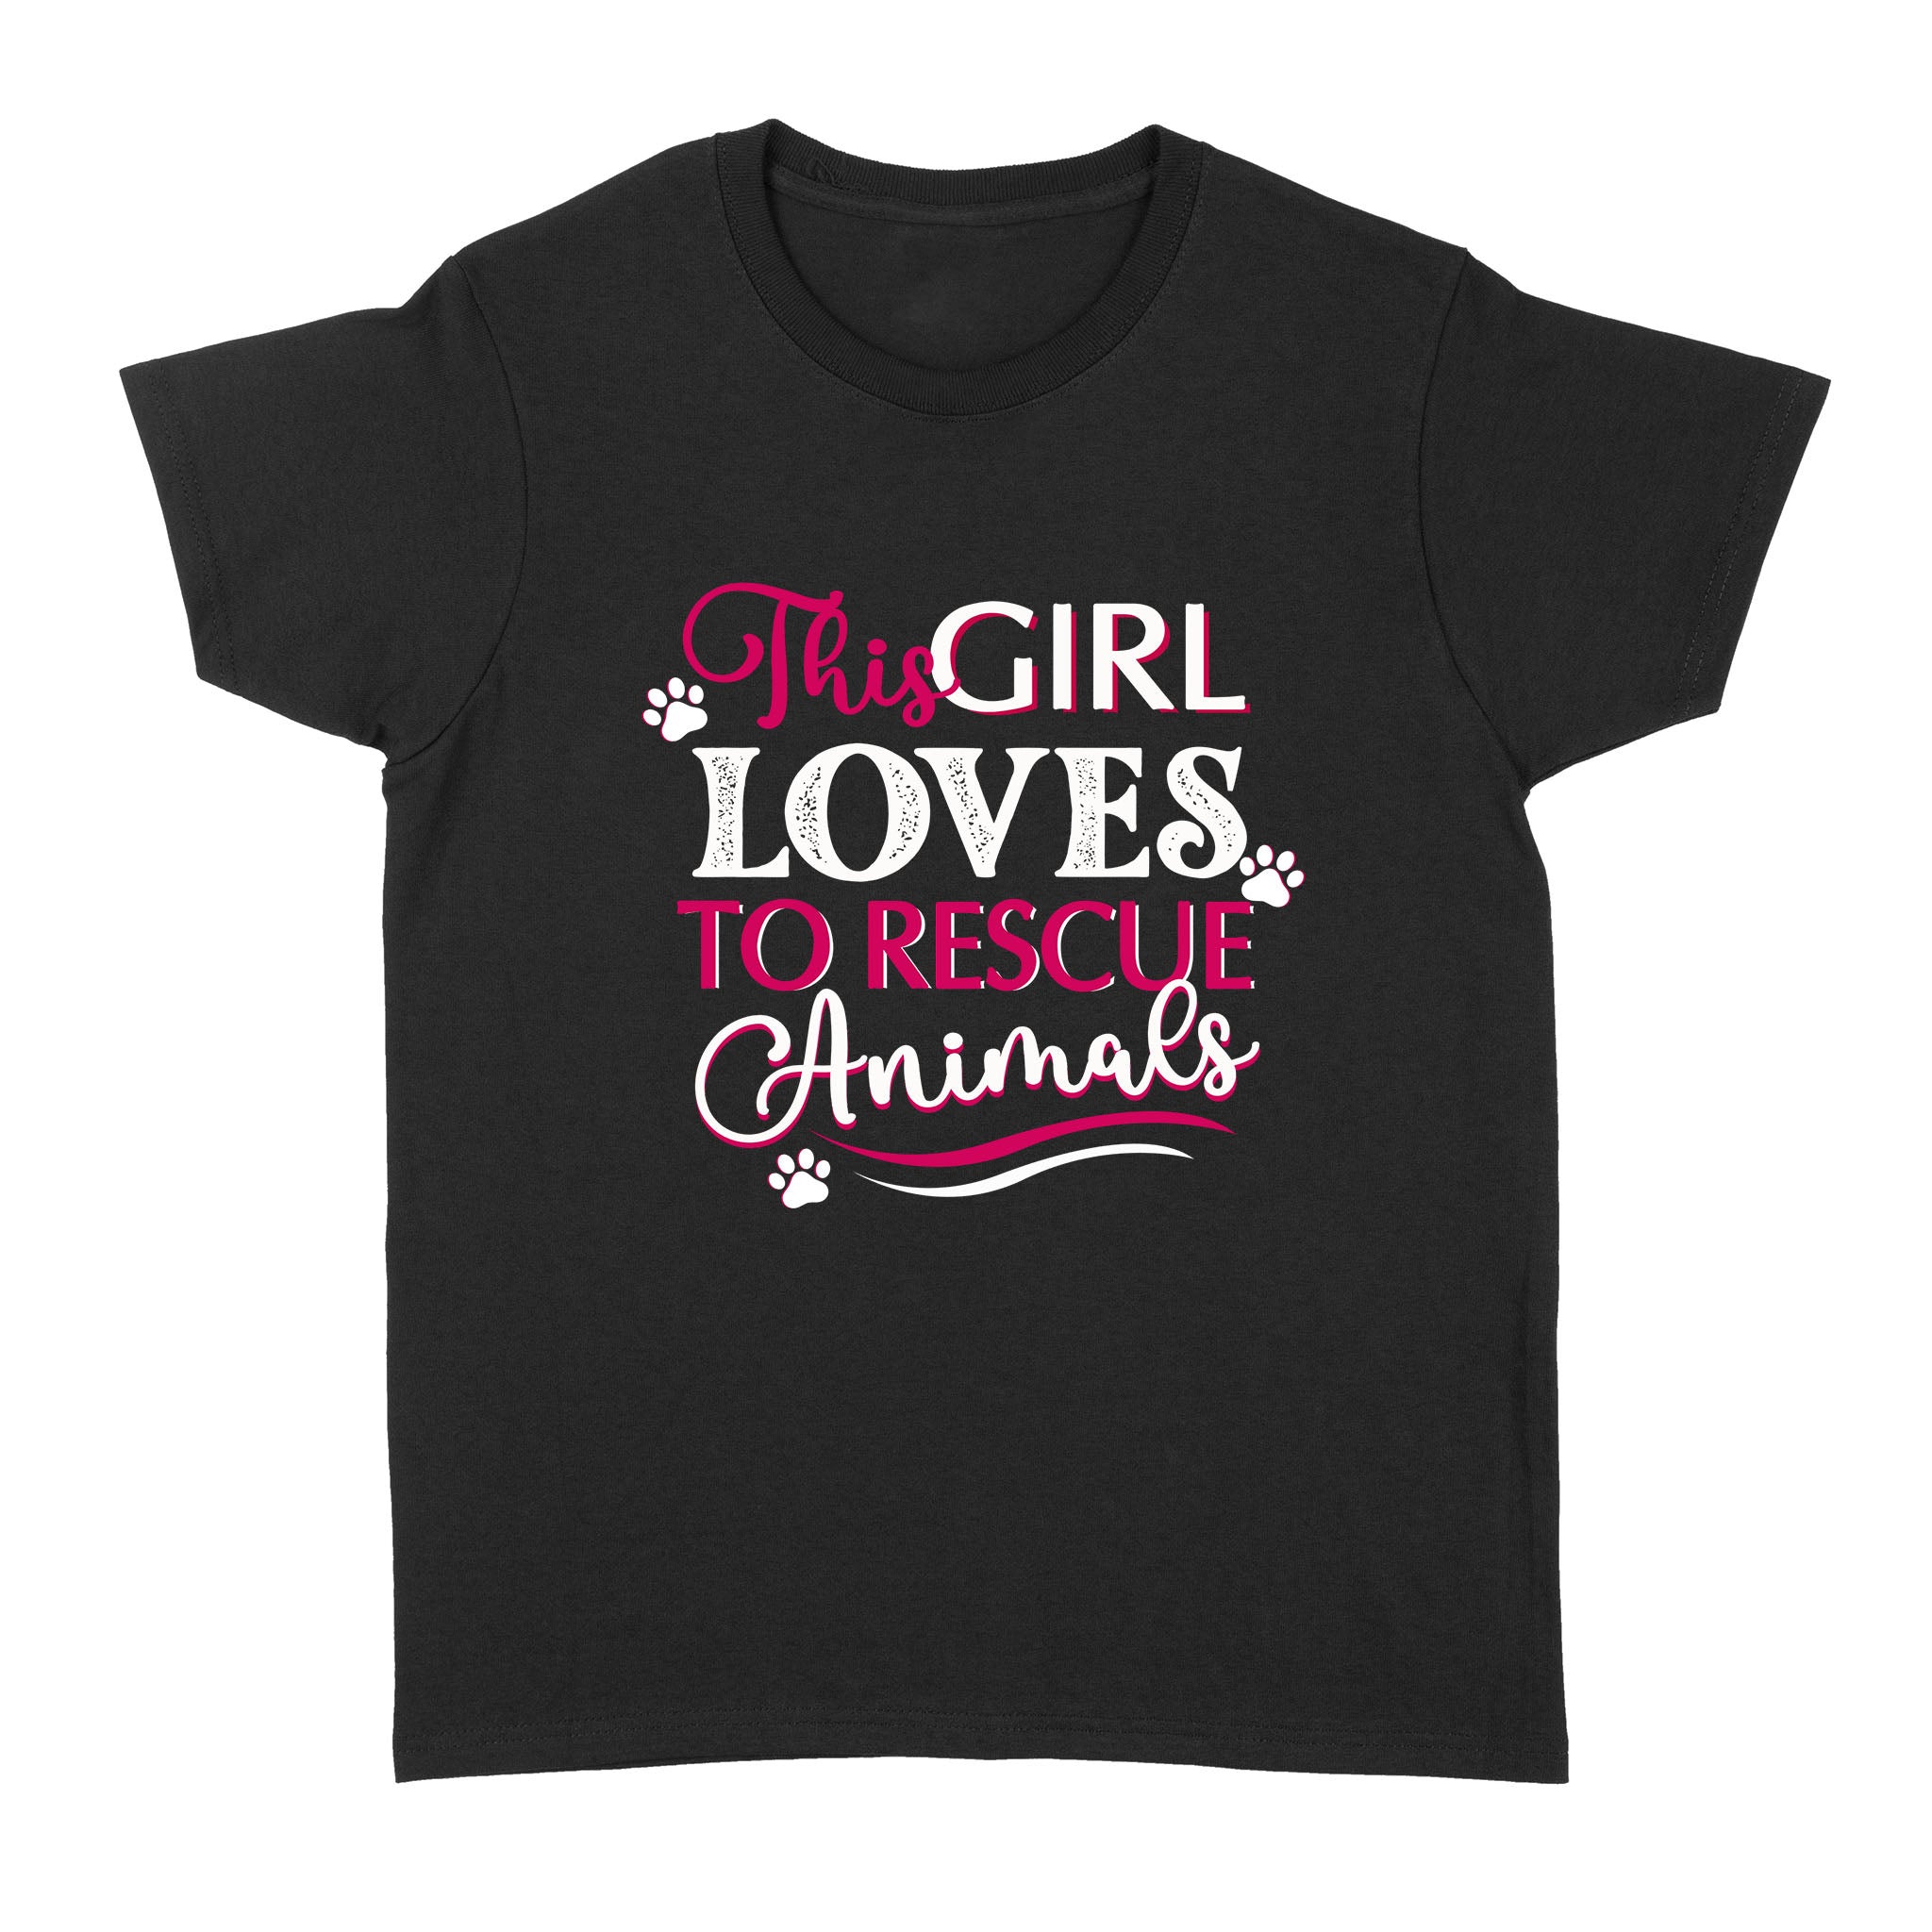 This Girl Loves To Rescue Animal T-shirt| Gift for Dog Lover, Cat Lover, Pet Owner| JTSD170 A02M01